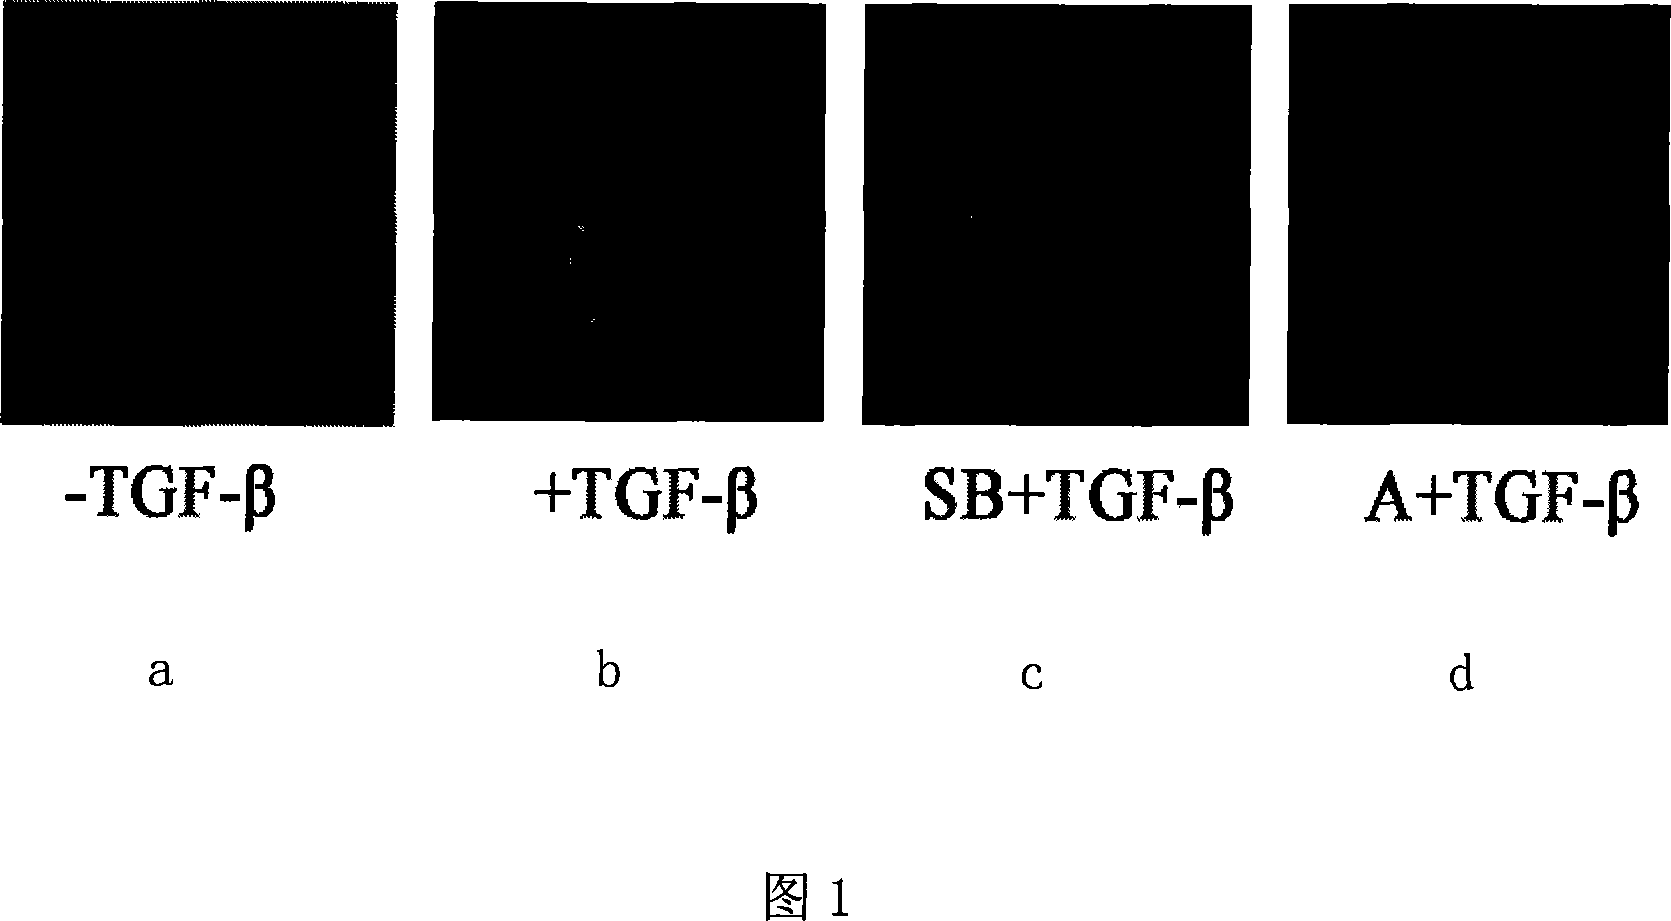 Screening model of medicaments related to TGF-Beta signal path